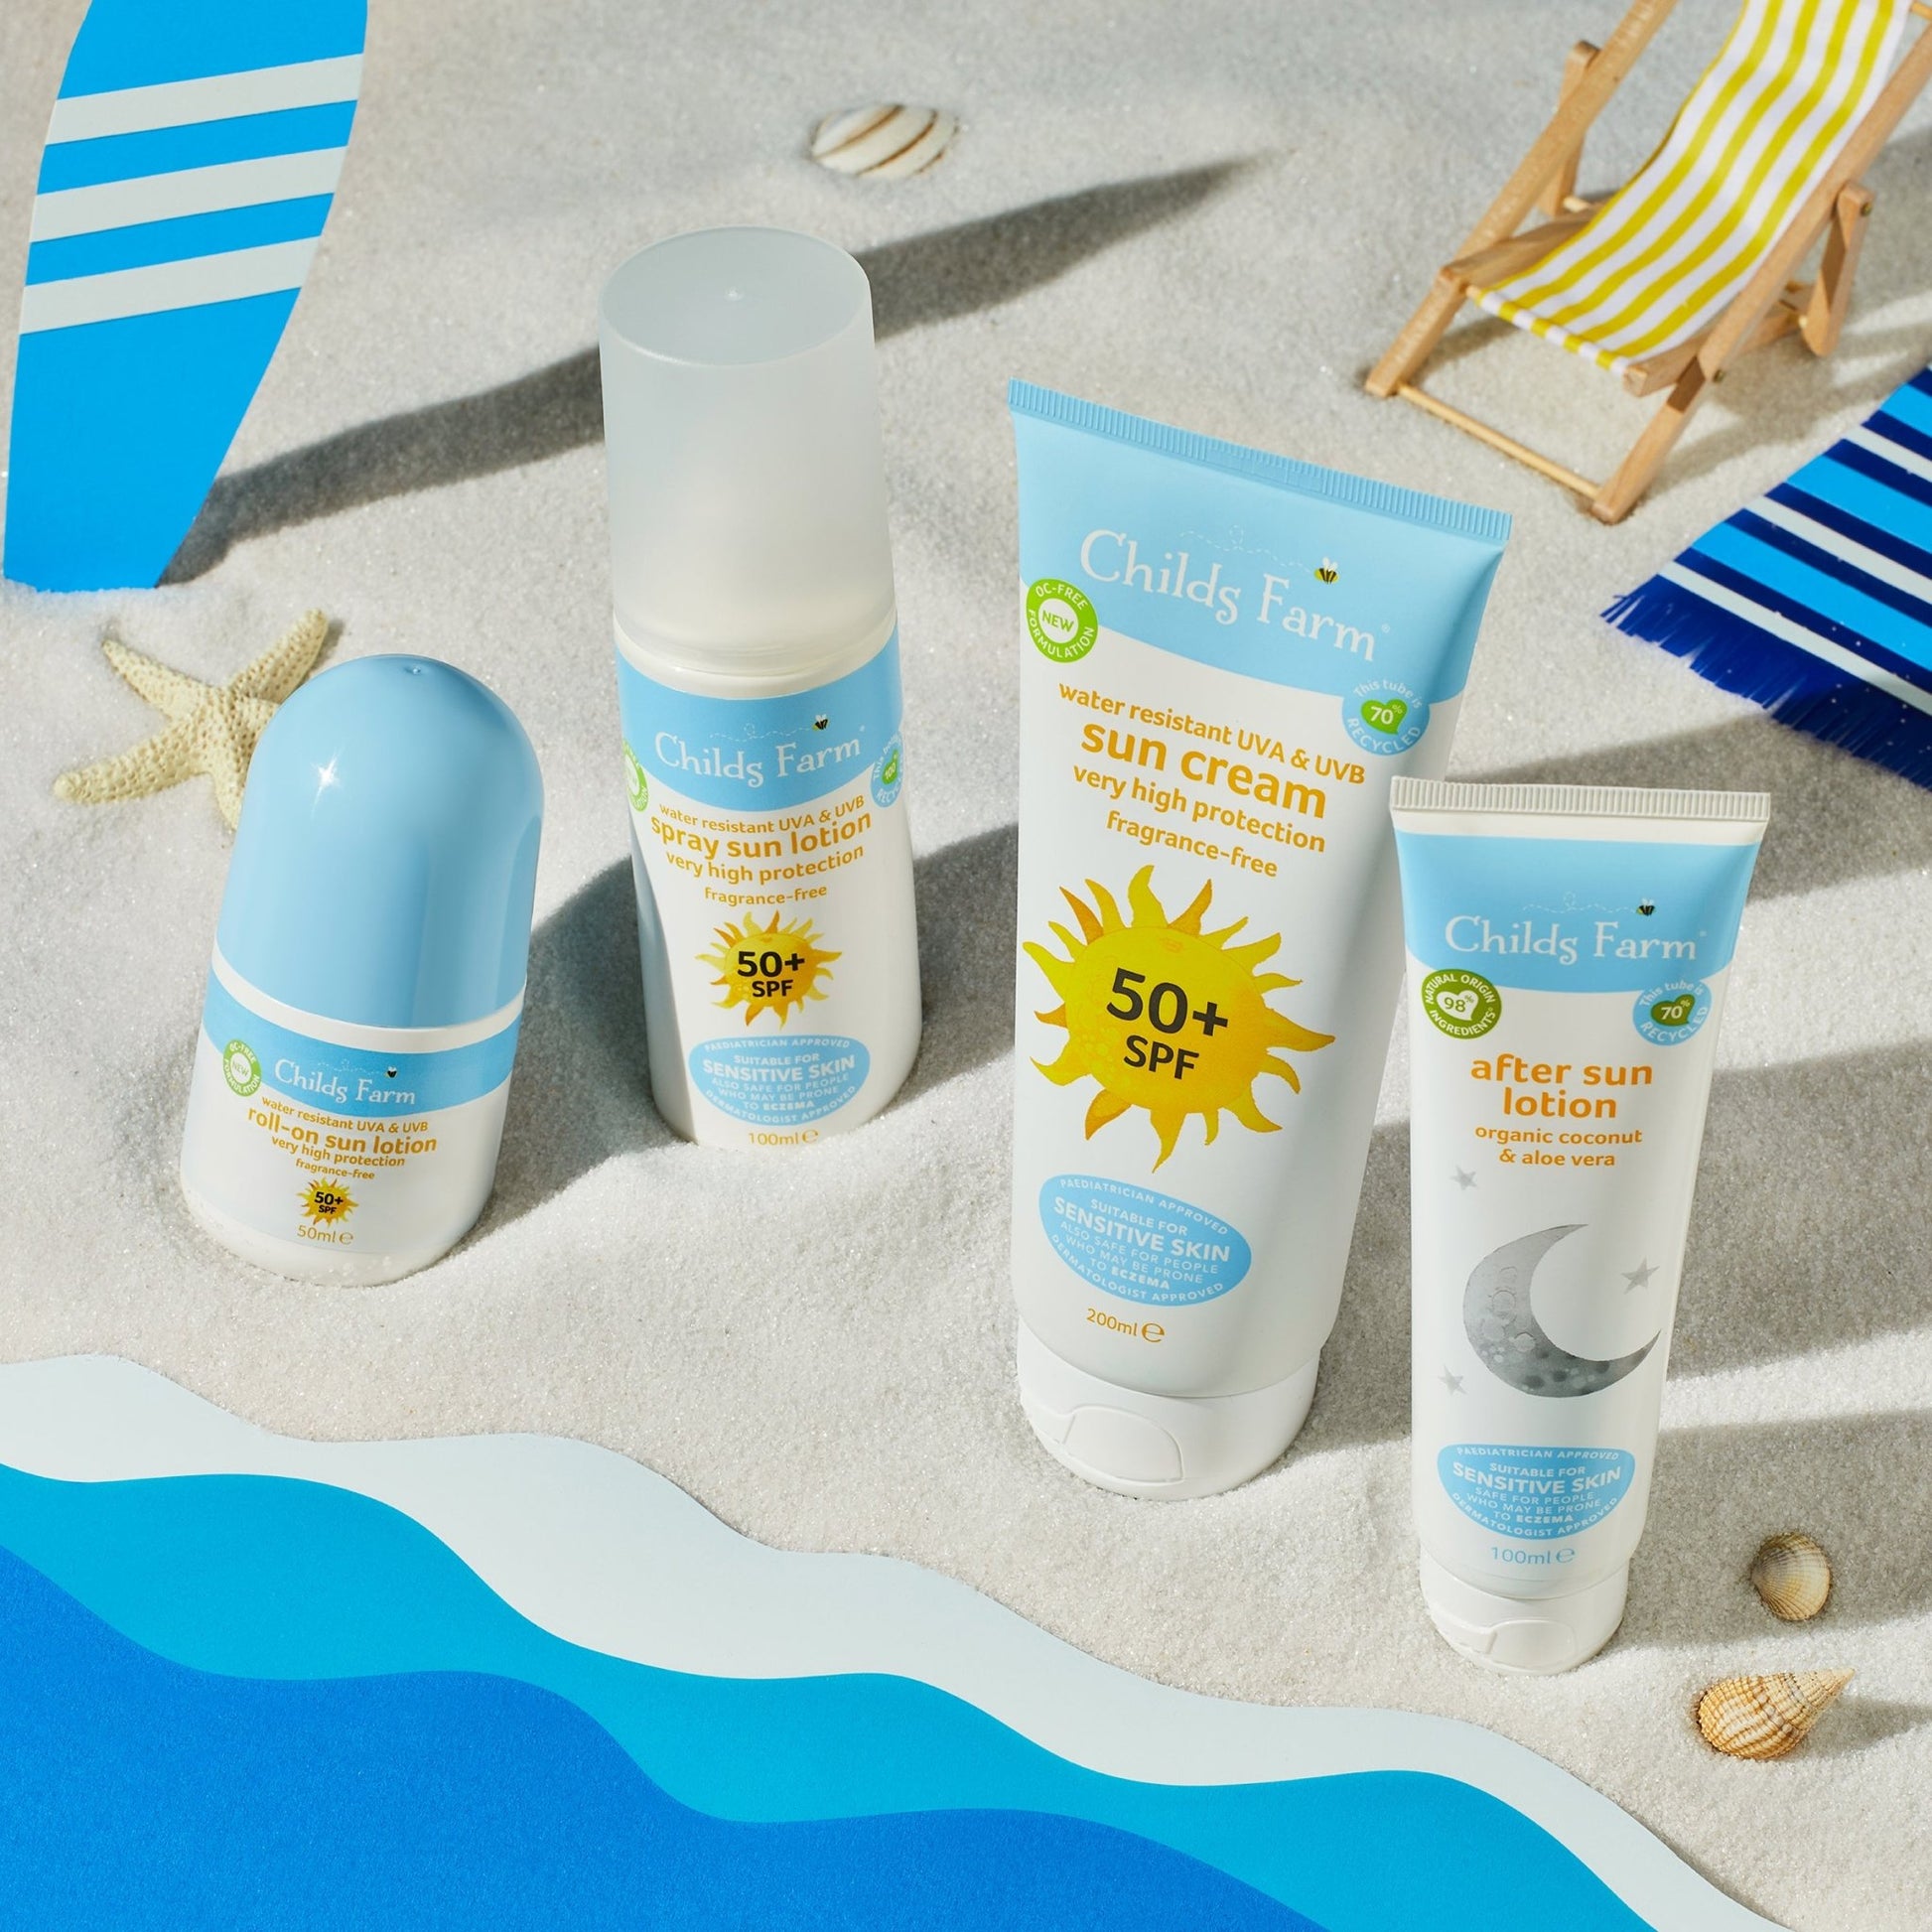 Childs Farm 50+ SPF roll-on sun lotion fragrance-free